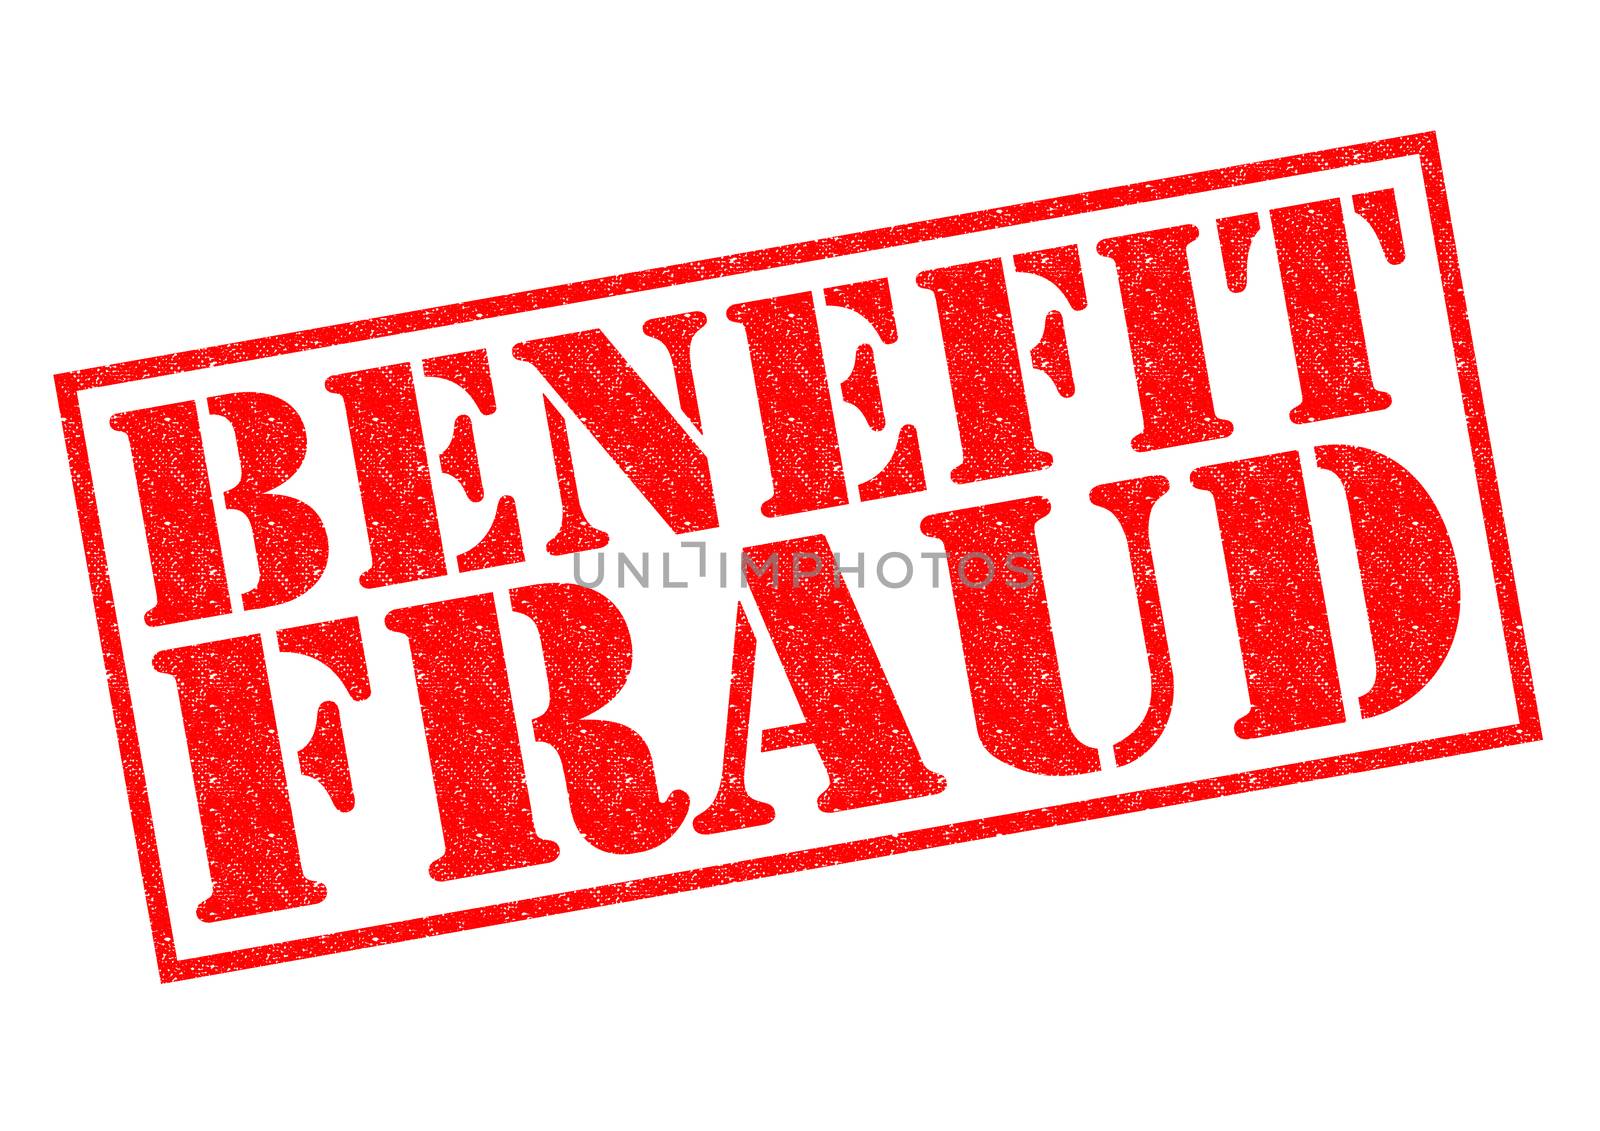 BENEFIT FRAUD red Rubber Stamp over a white background.